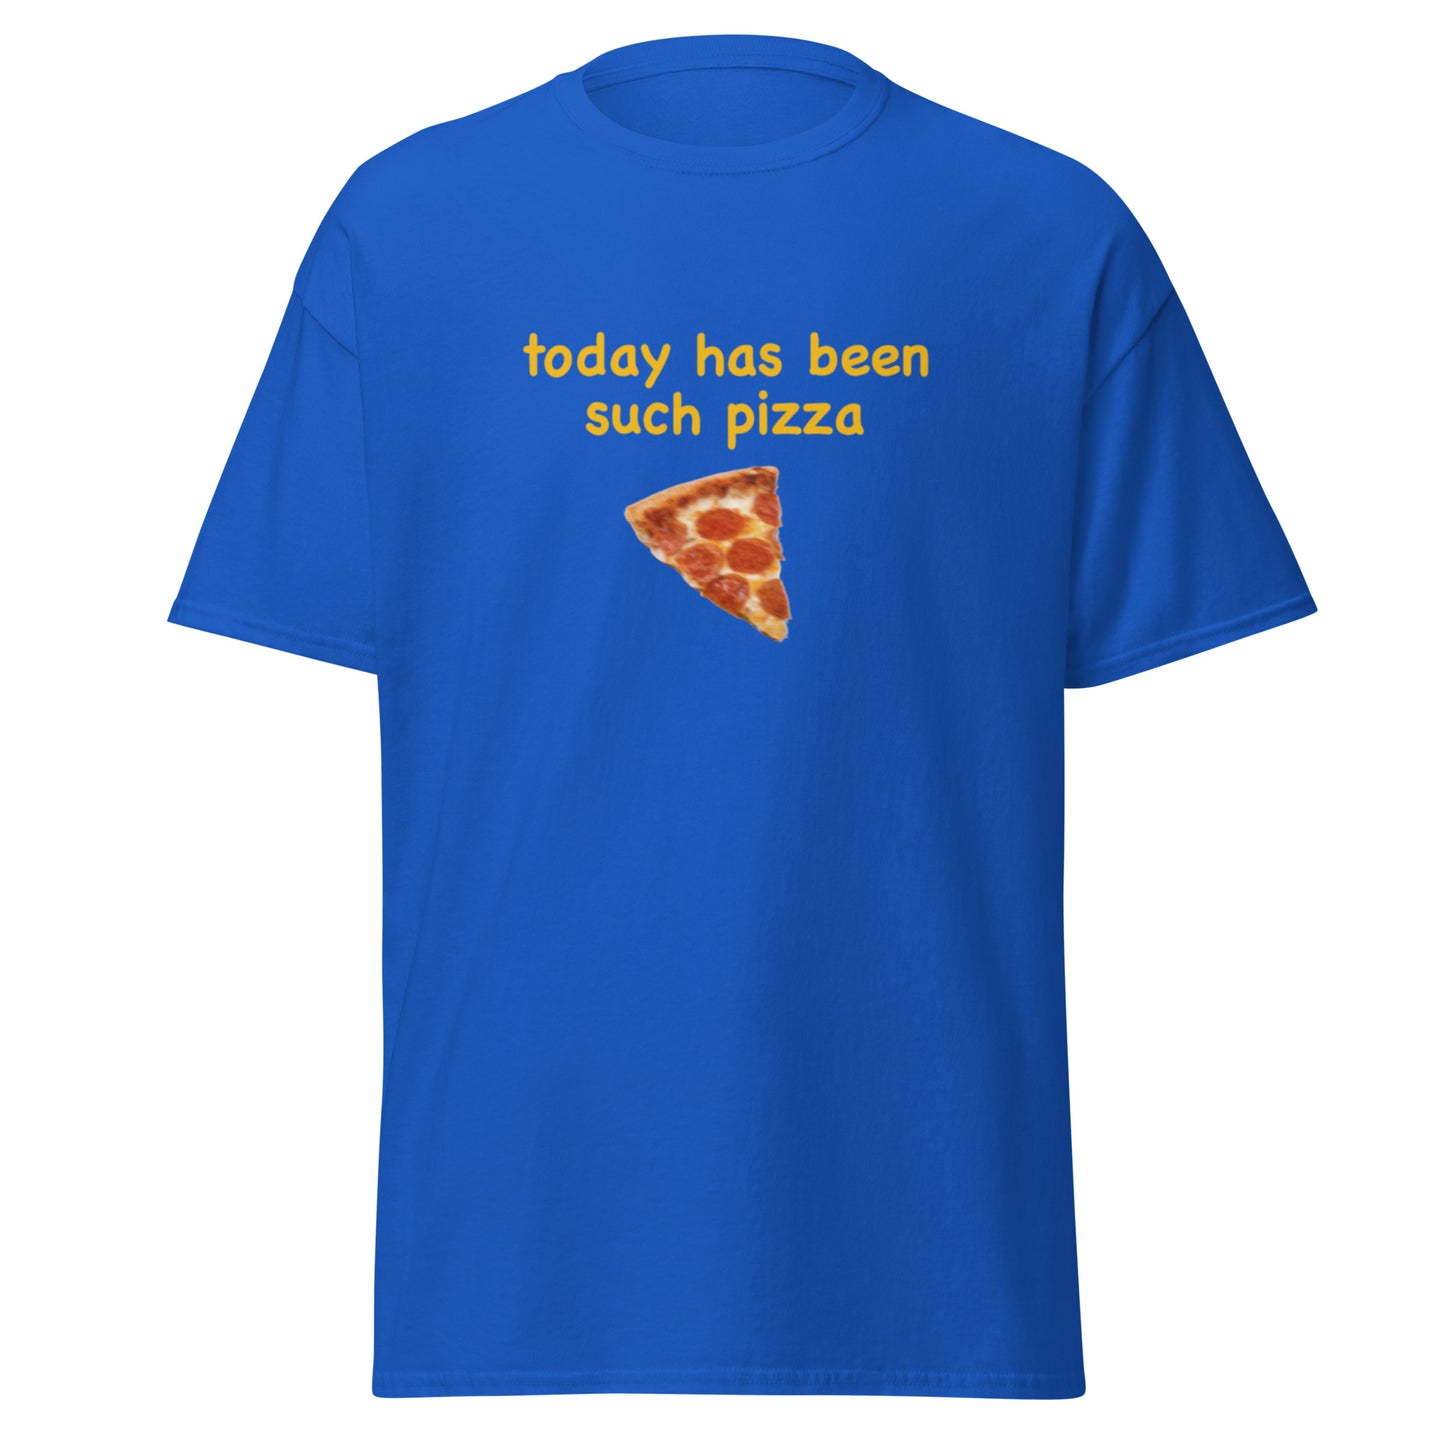 TODAY HAS BEEN SUCH PIZZA TEE